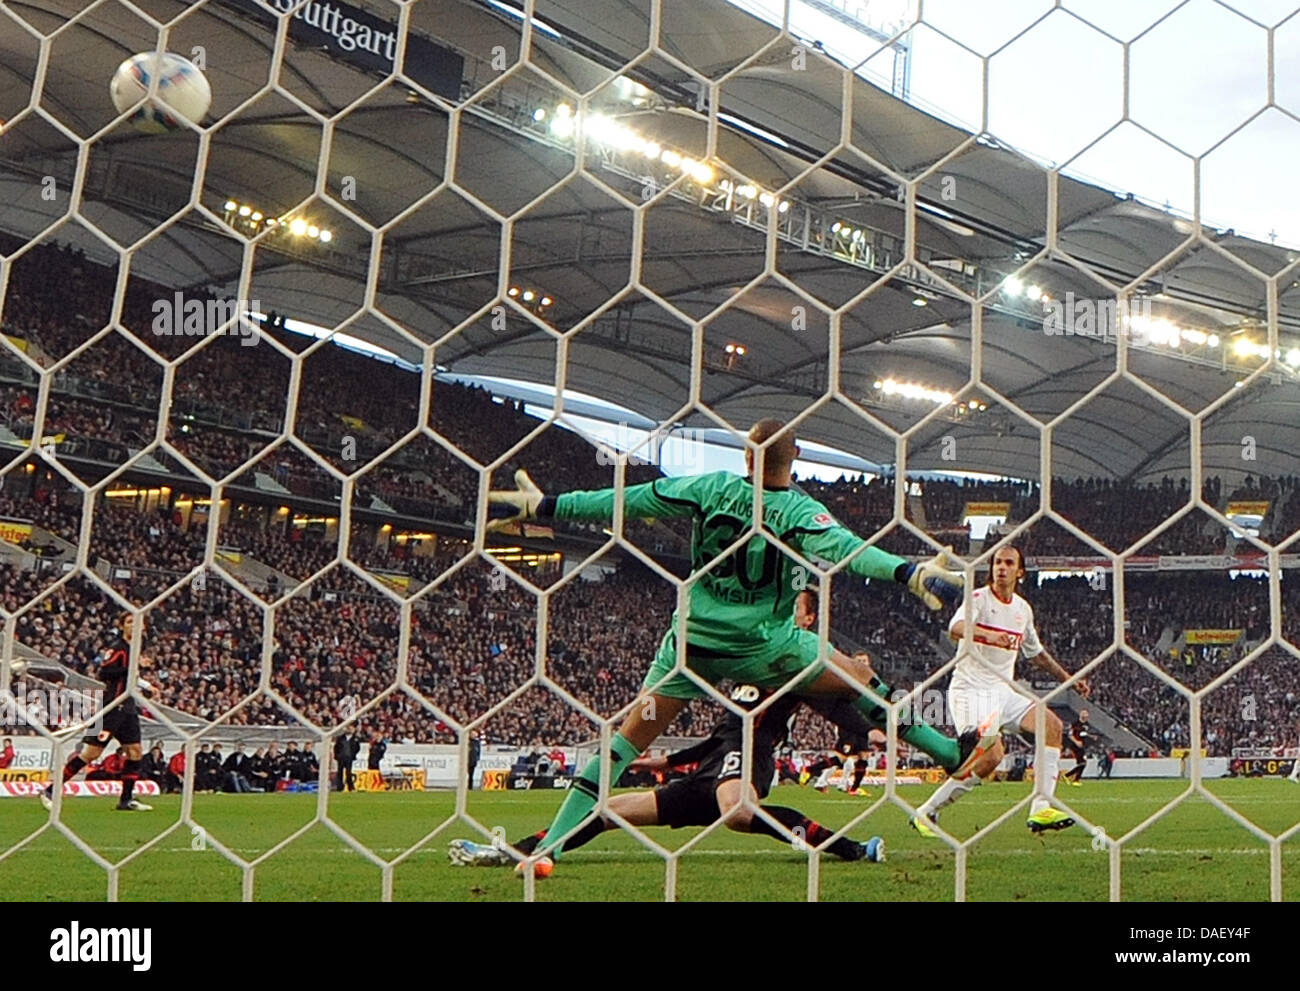 Fußball Bundesliga 13. Spieltag: VfB Augsburg goal keeper Mohammed Amsif cannot prevent the 1-0 goal by Stuttgart's Martin Harnik (R) during the German Bundesliga first division soccer match between VfB Stuttgart and FC Augsburg at the Mercedes-Benz Arena in Stuttgart, Germany, 20 November 2011. Stuttgart wins the match 2-1. Photo: Bernd Weissbrod  (ATTENTION: EMBARGO CONDITIONS! T Stock Photo